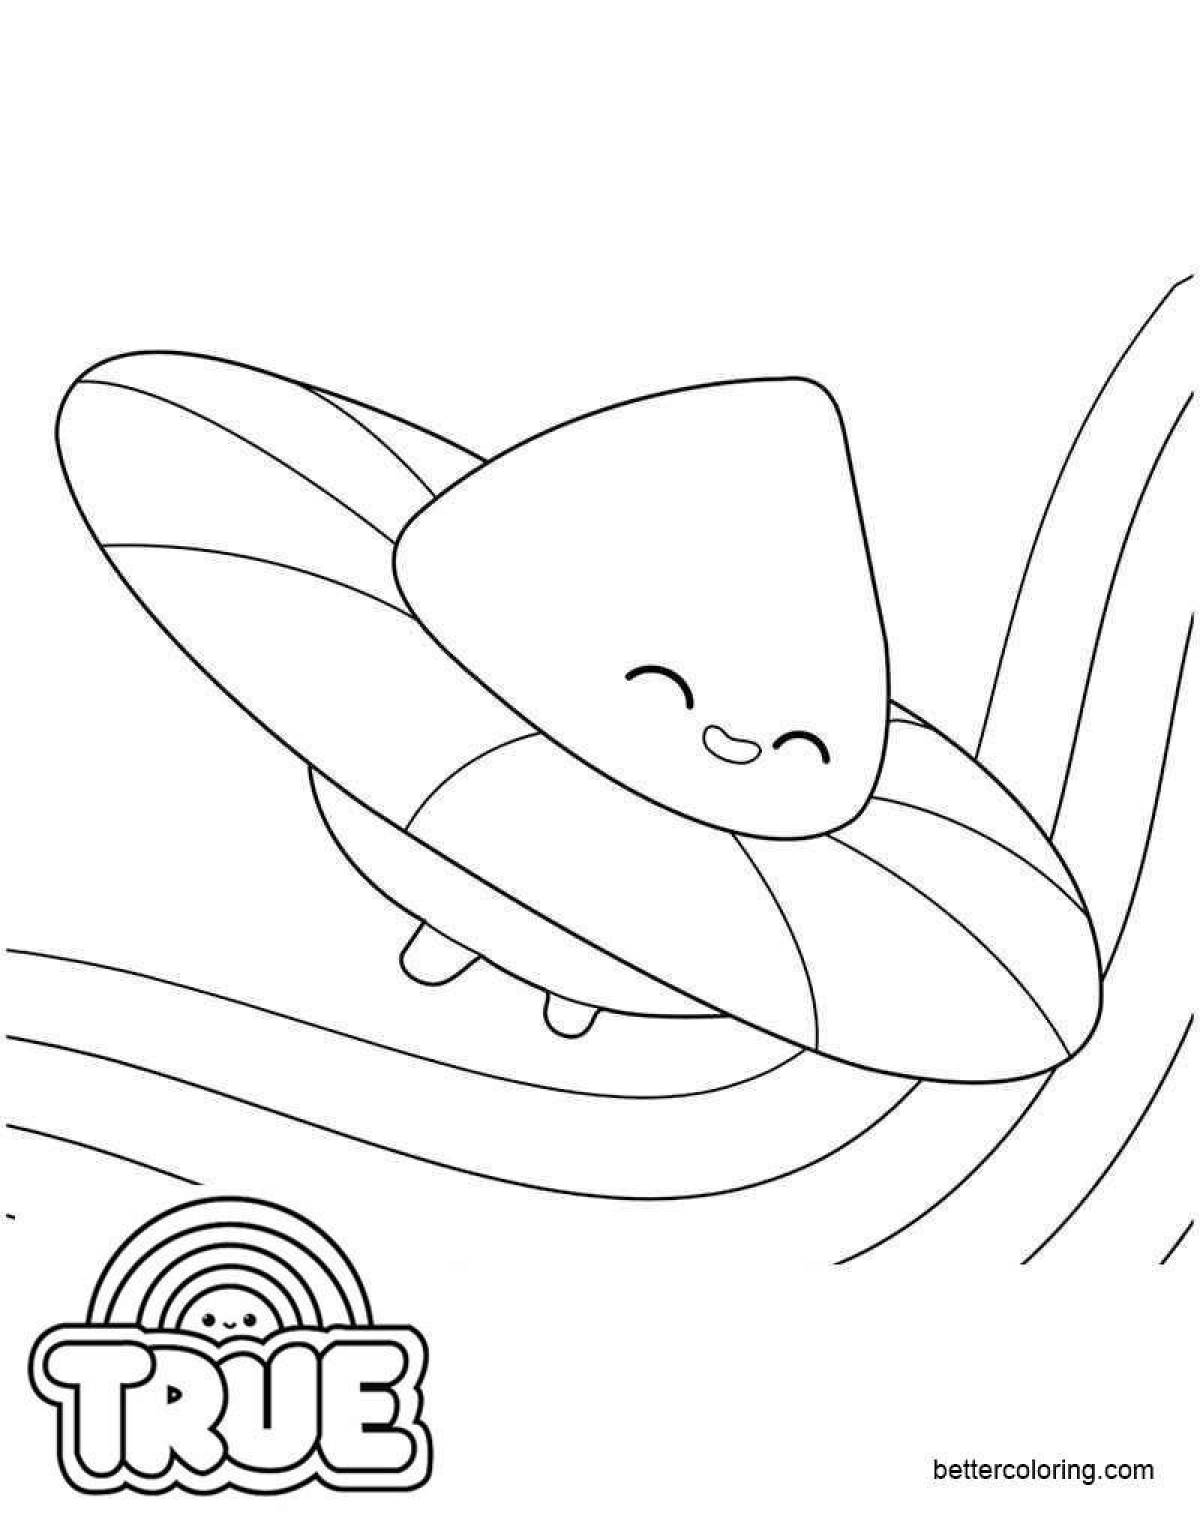 Tempting rainbow kingdom coloring page